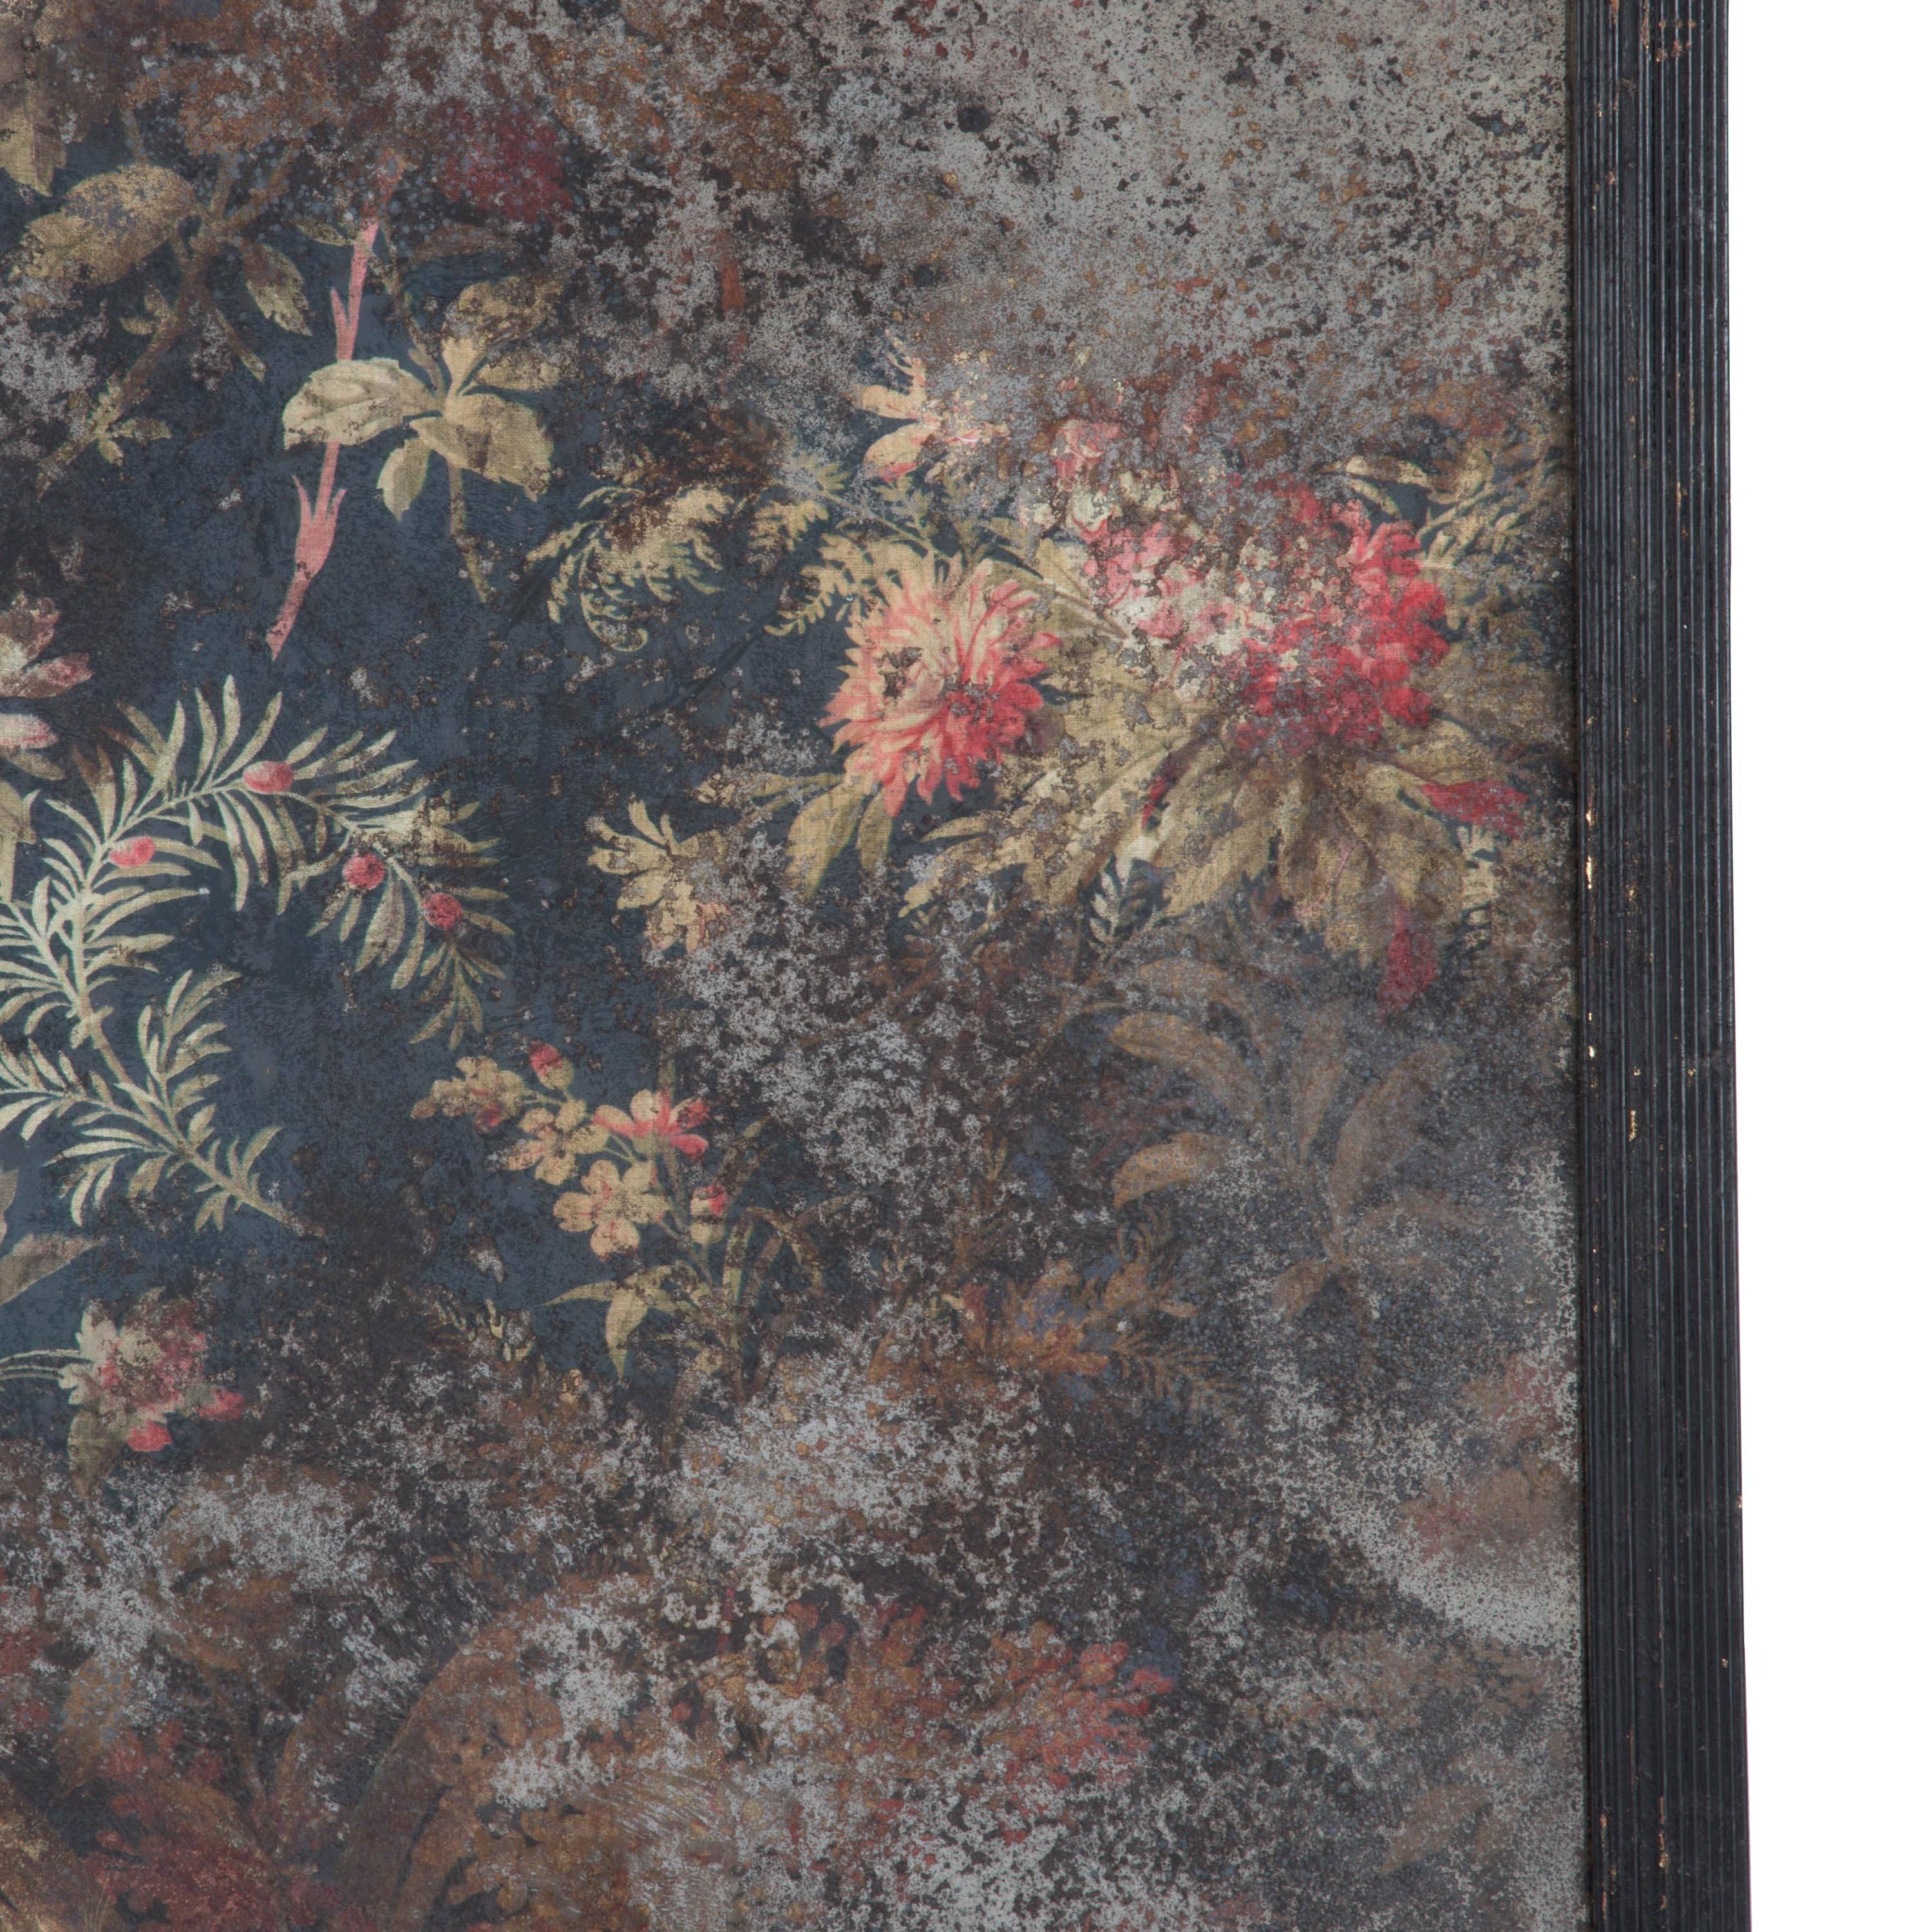 Having trained at Camberwell School of Art, Huw Griffith's aesthetic is informed by a background in the decorative arts. With his Floral series, Griffith brings botanic flair to antique mirror plate. Using his collection of antique textiles scoured